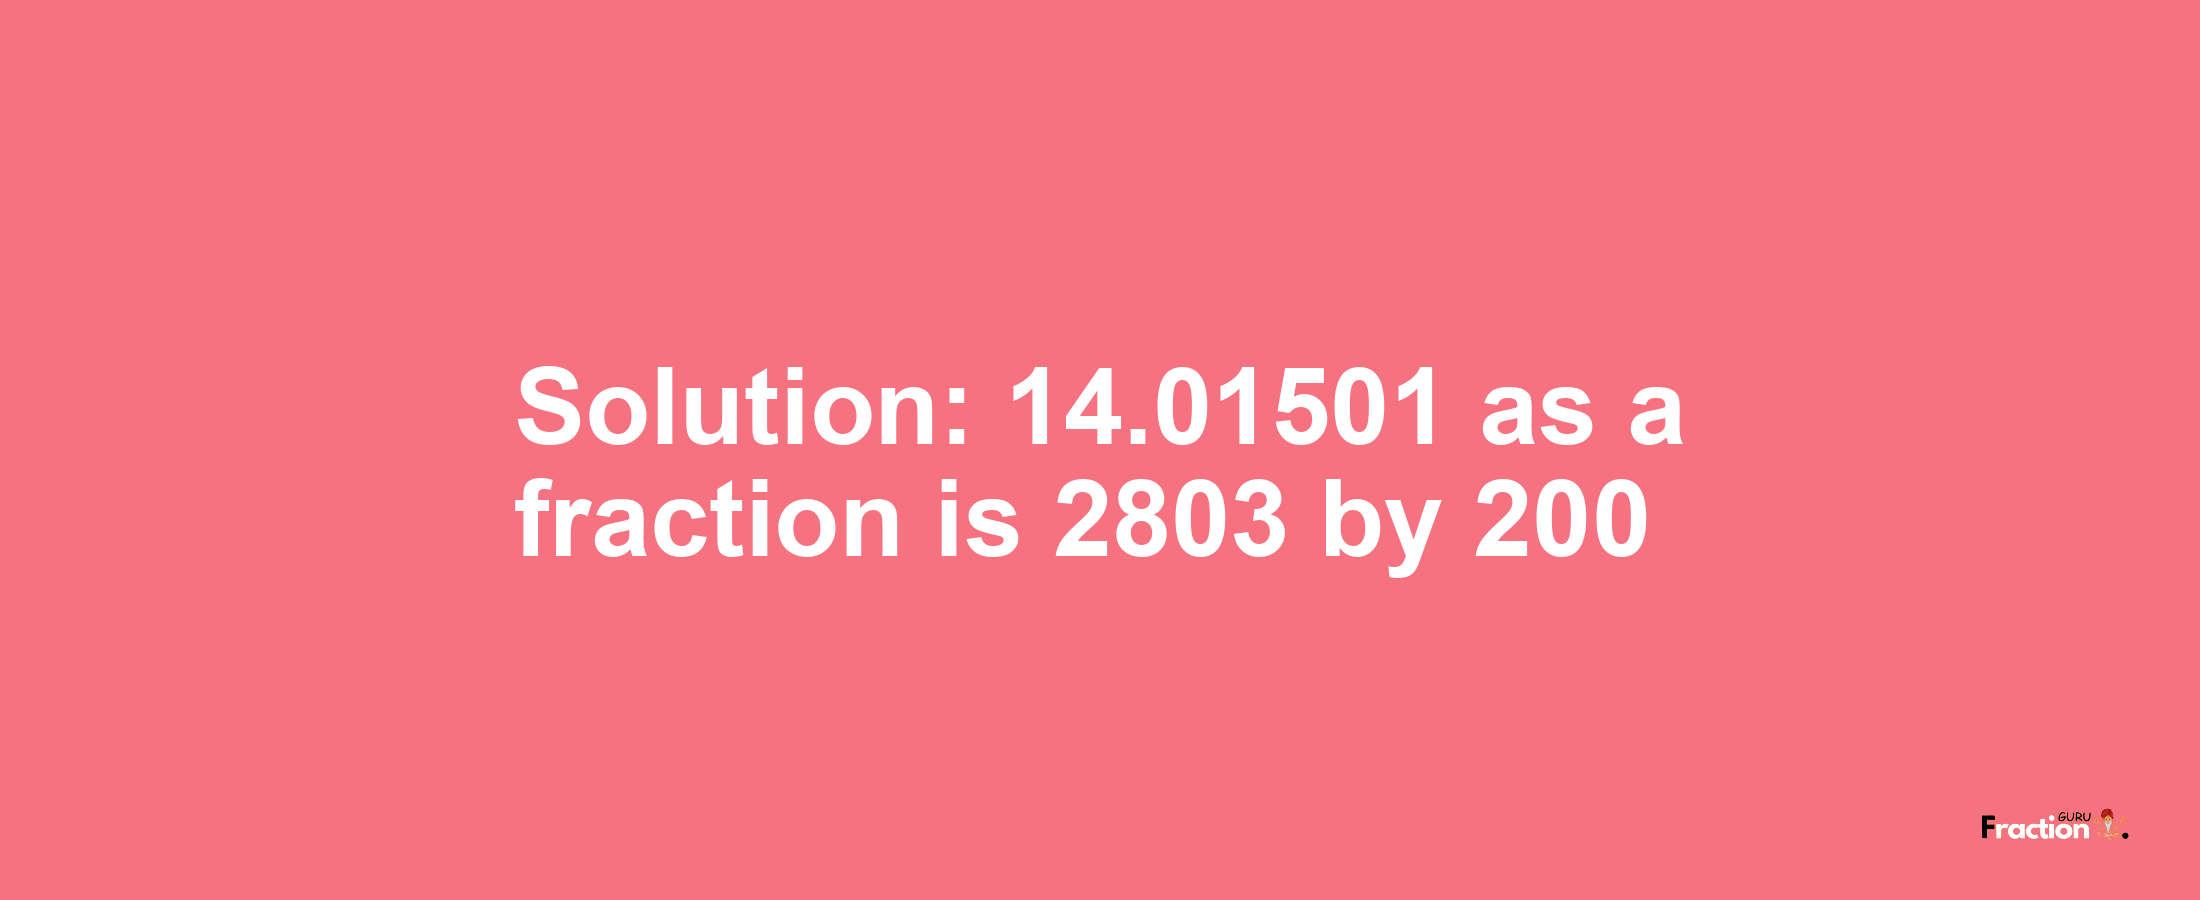 Solution:14.01501 as a fraction is 2803/200